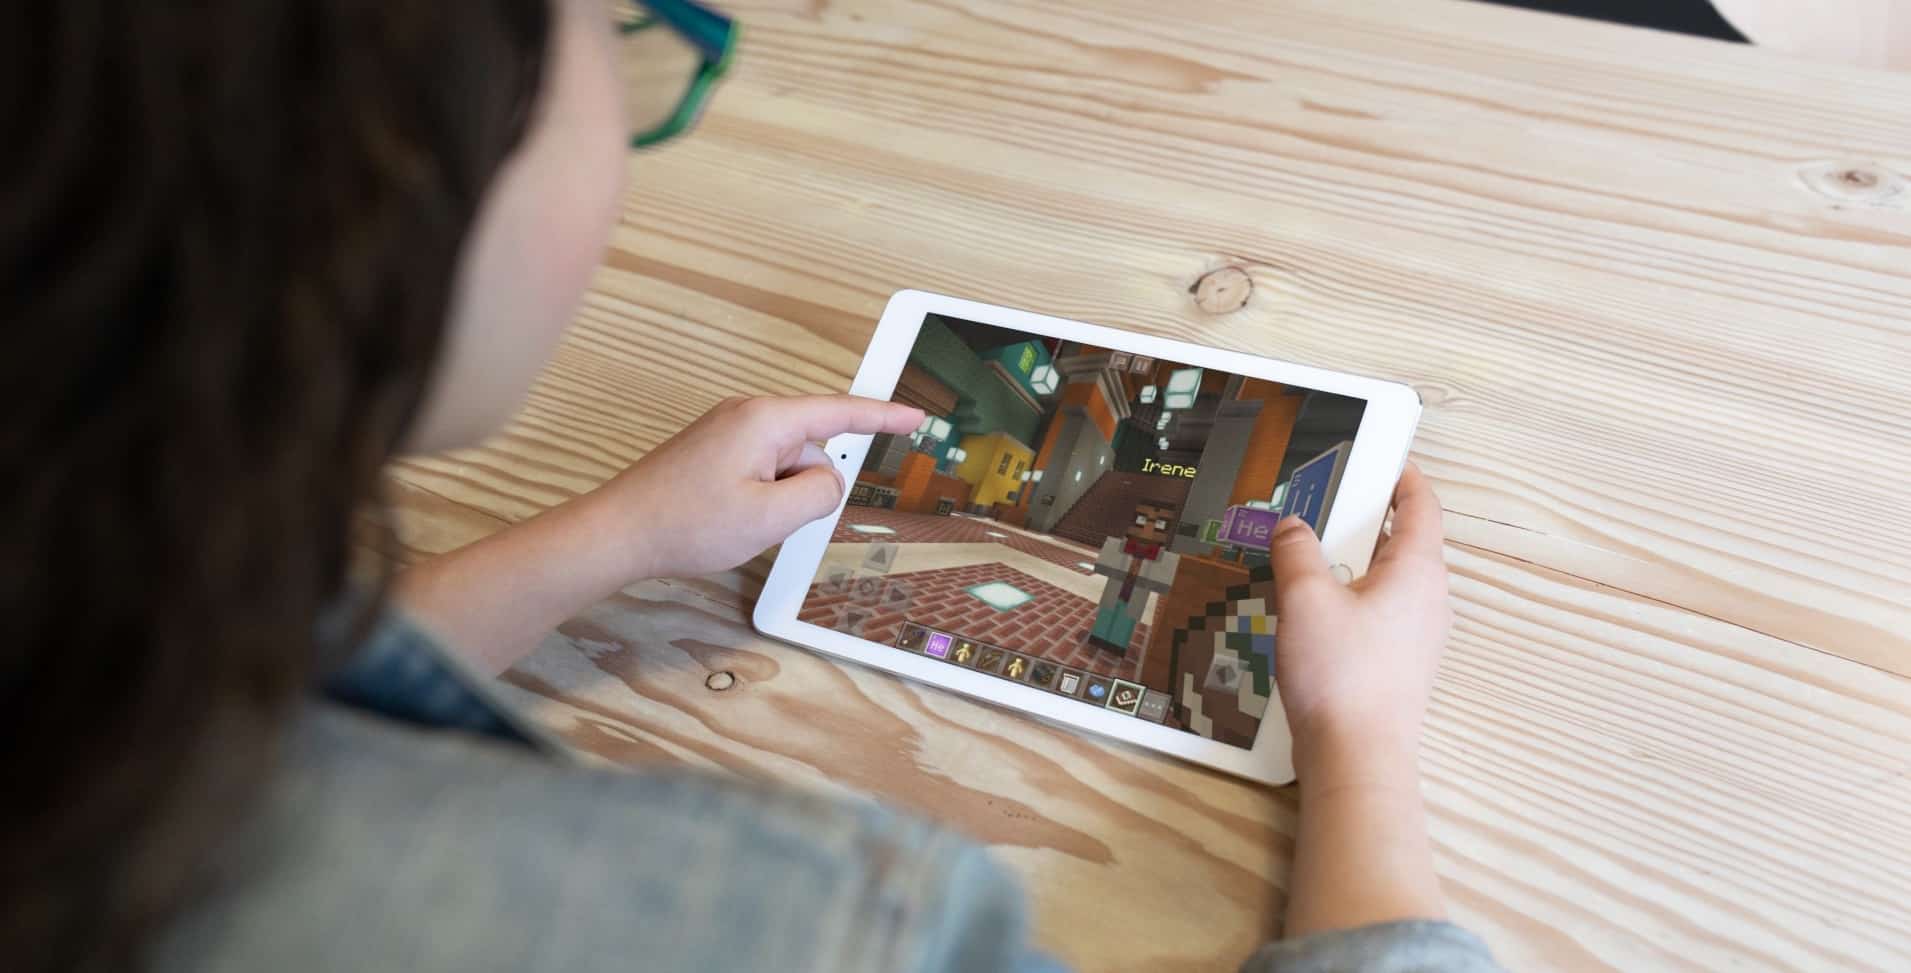 Minecraft: Education Edition can teach math, science, history, and more.